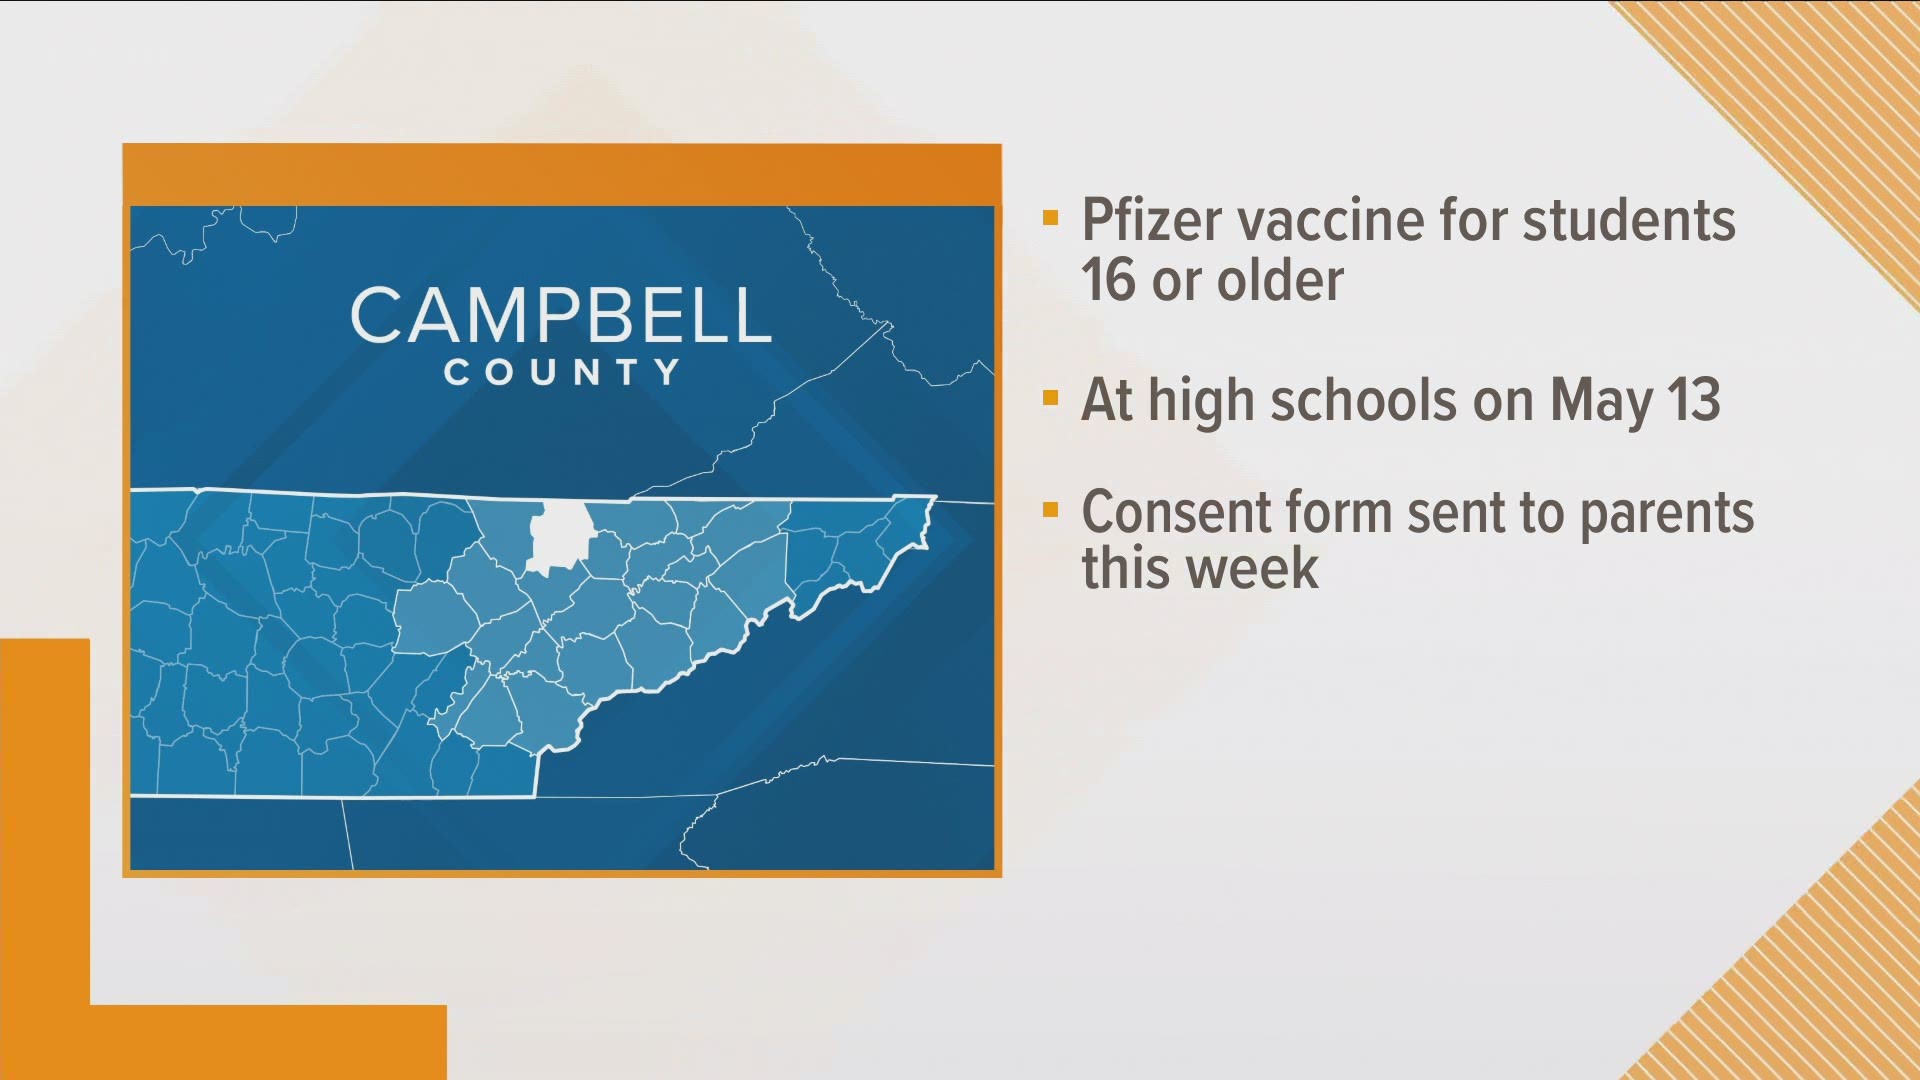 On May 13, the school district will offer the Pfizer vaccine for students 16 and older at Jellico and Campbell County high schools.